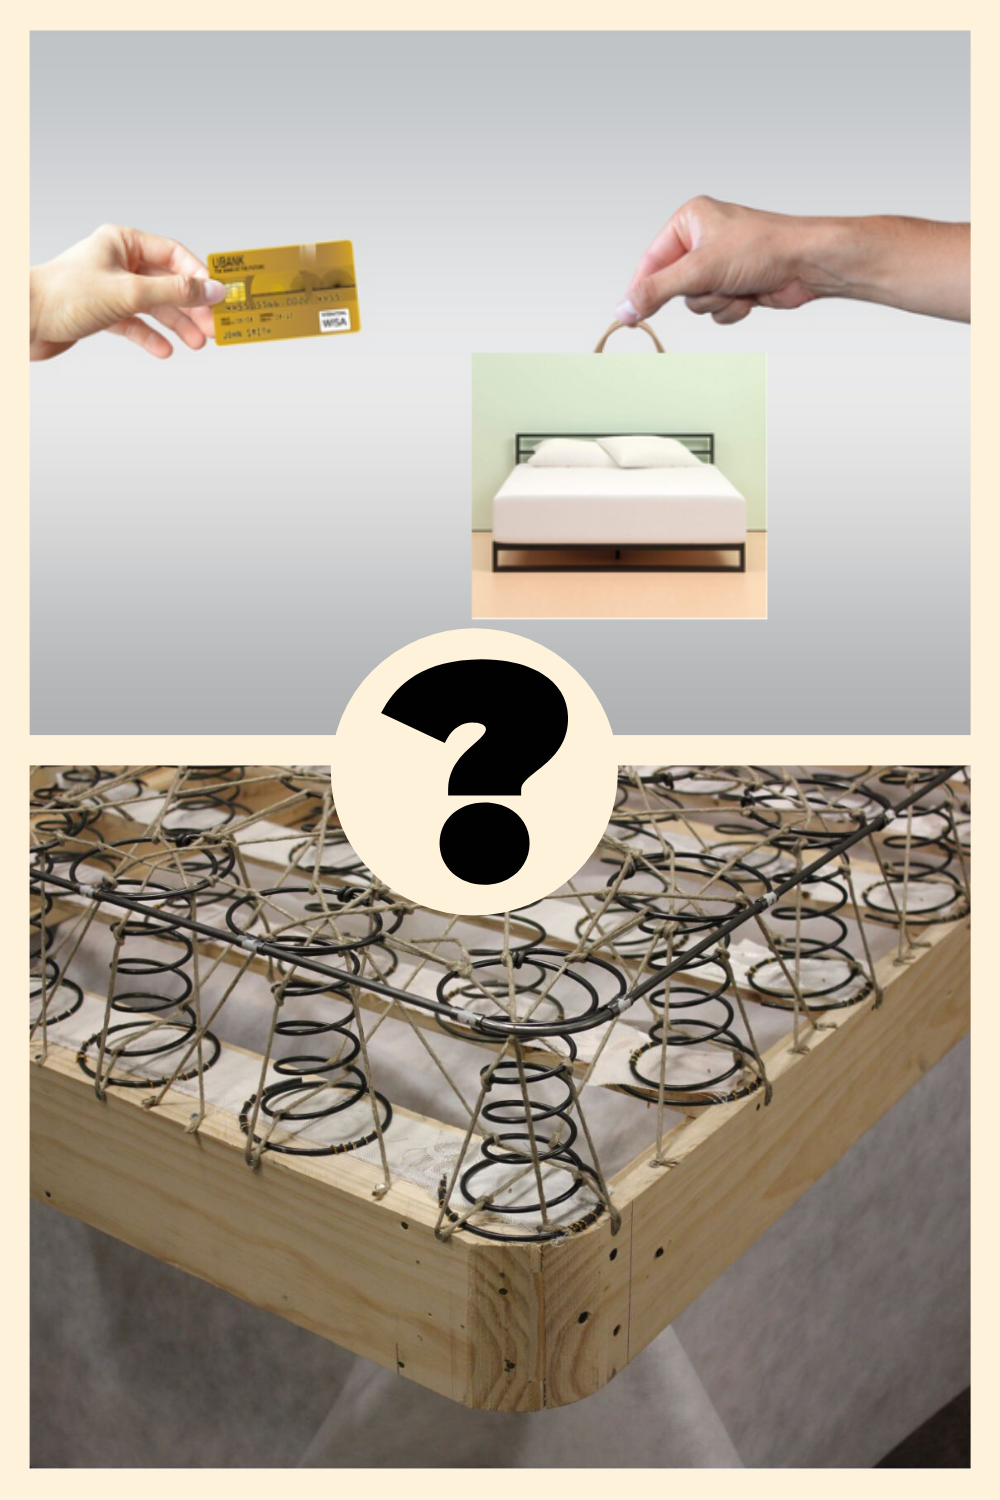 Do You Need To Replace Box Springs When Buying A New Mattress?